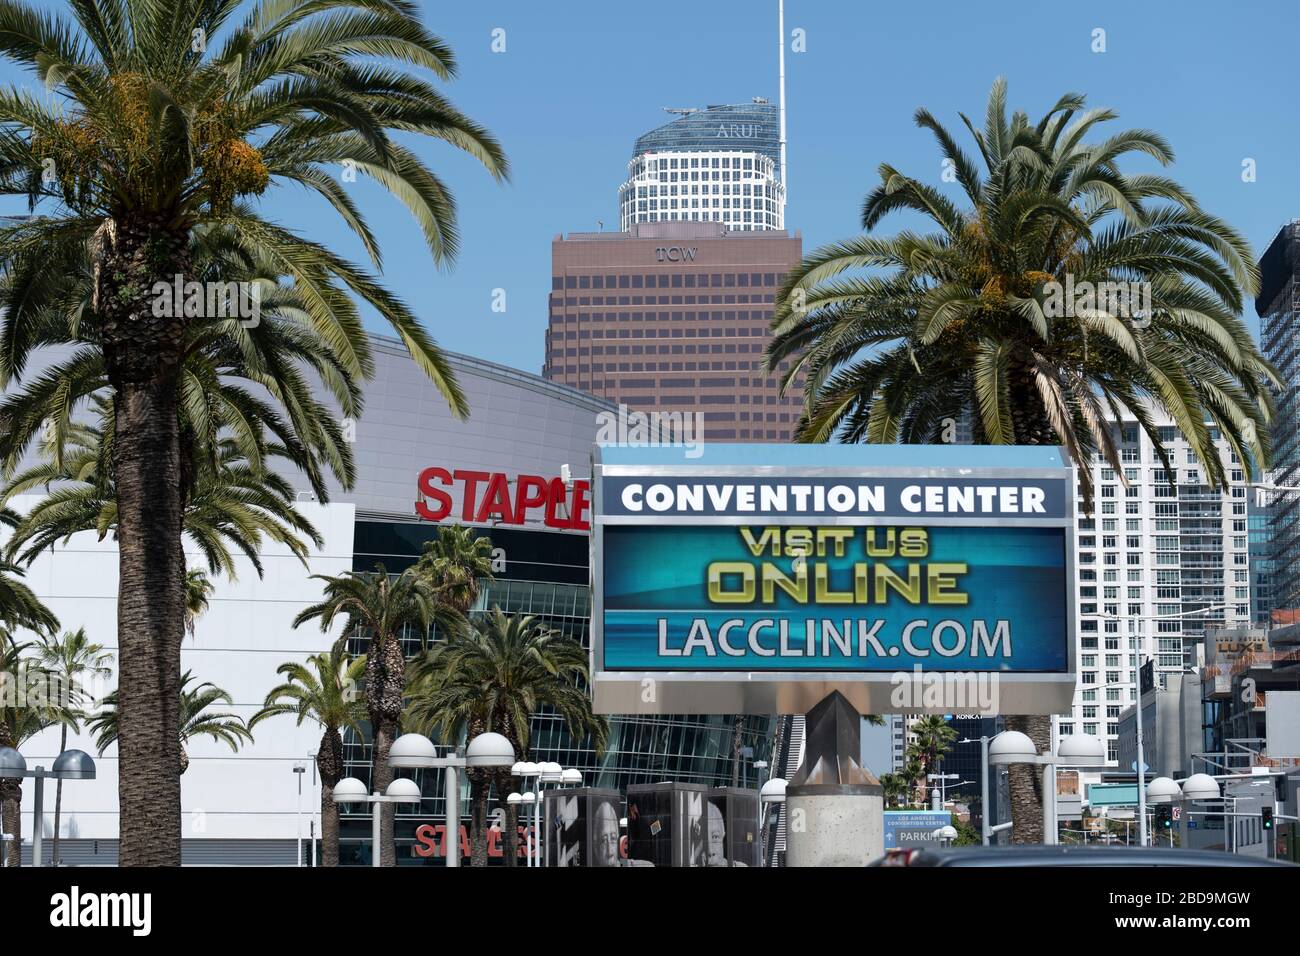 Los Angeles, CA/USA - April 1, 2020: The Los Angeles Convention Center and Staples Center Stock Photo